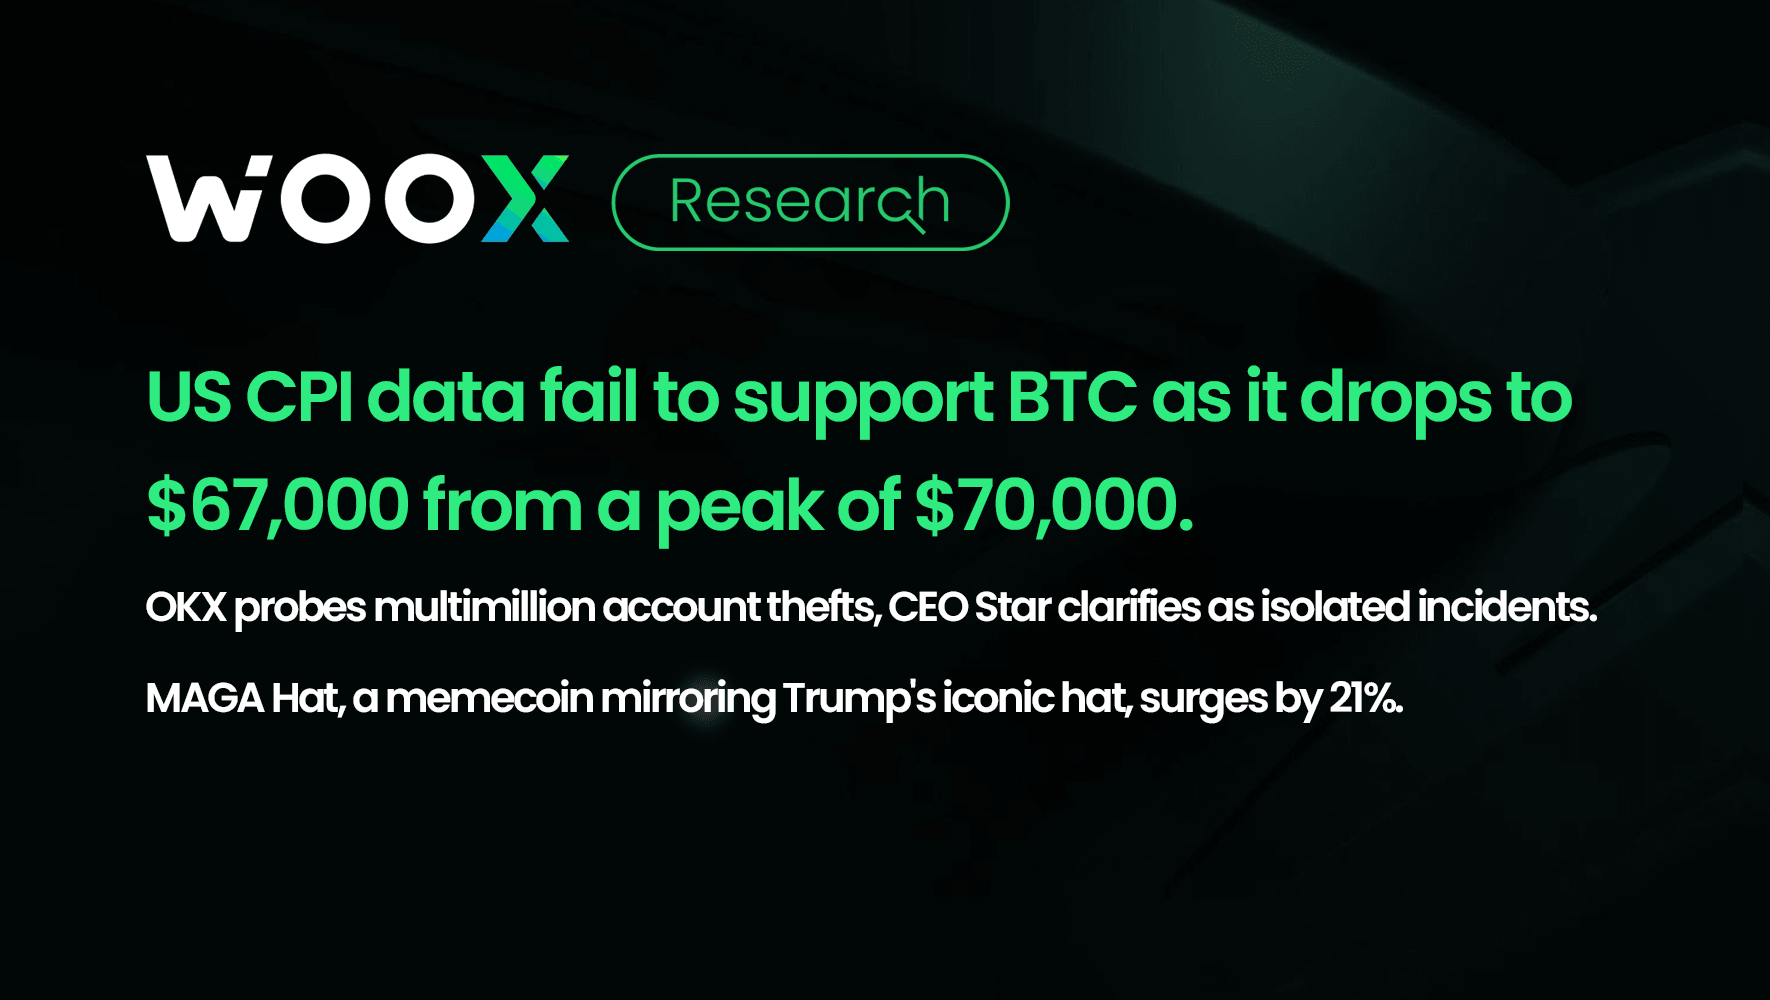 US CPI data fail to support BTC as it drops to $67,000 from a peak of $70,000